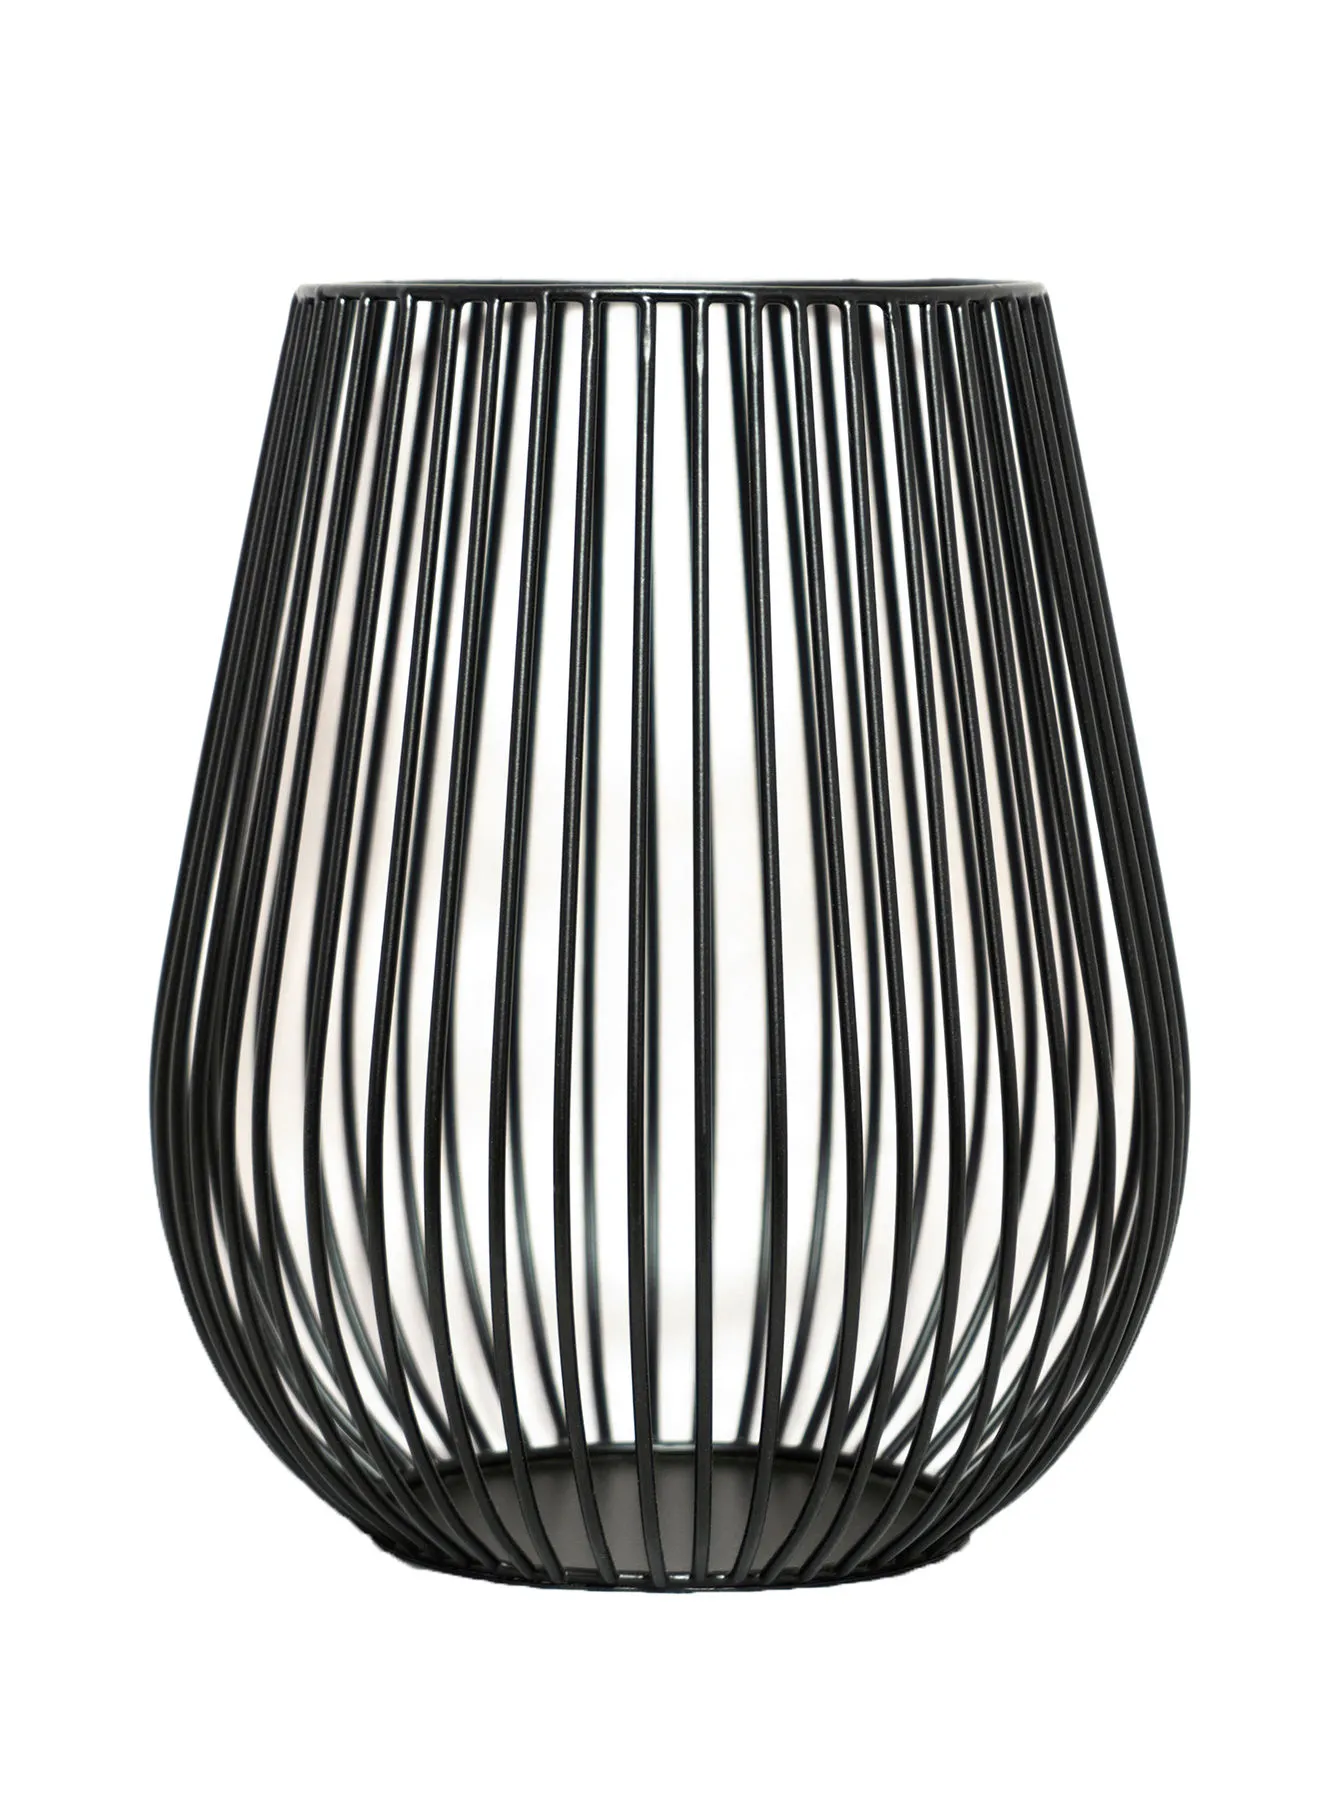 ebb & flow Modern Handmade Candle Holder Lantern Unique Luxury Quality Scents For The Perfect Stylish Home Black 21 x 21 x 26centimeter